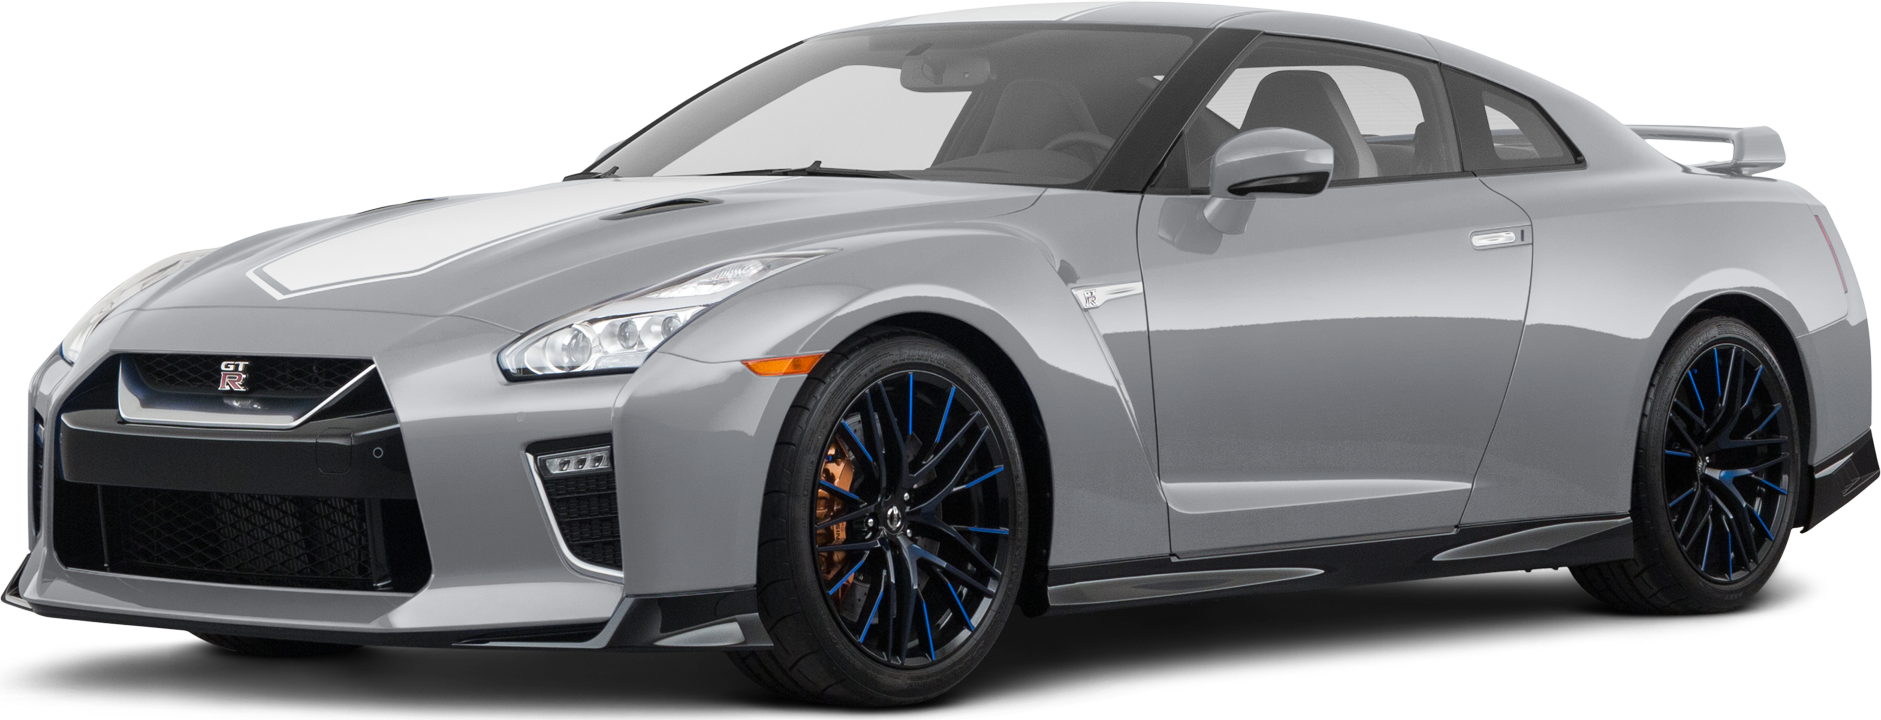 One Week with the 2021 Nissan GT-R - Autotrader